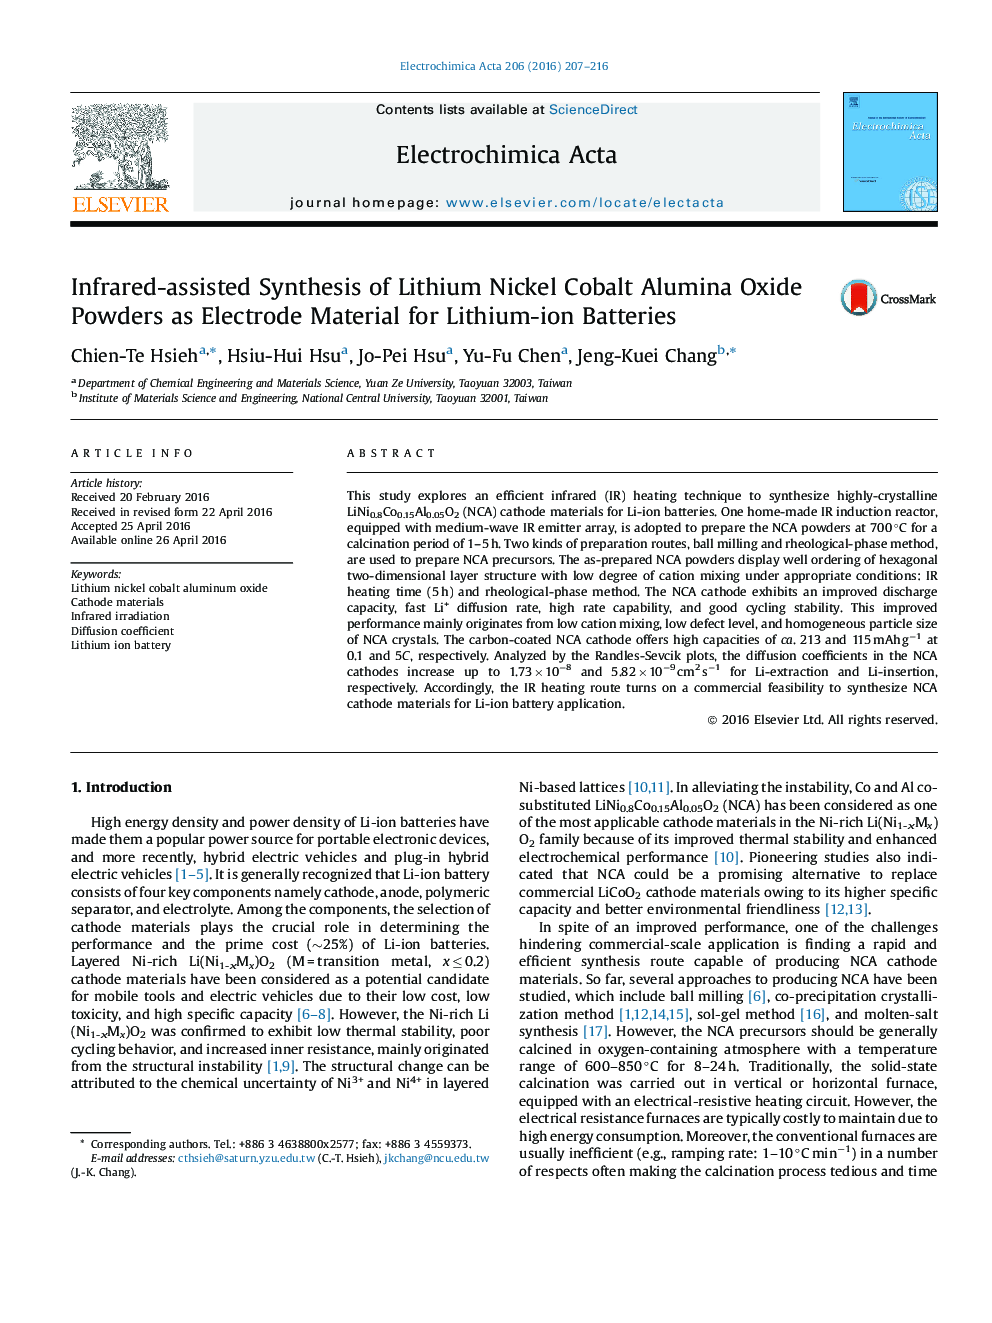 Infrared-assisted Synthesis of Lithium Nickel Cobalt Alumina Oxide Powders as Electrode Material for Lithium-ion Batteries